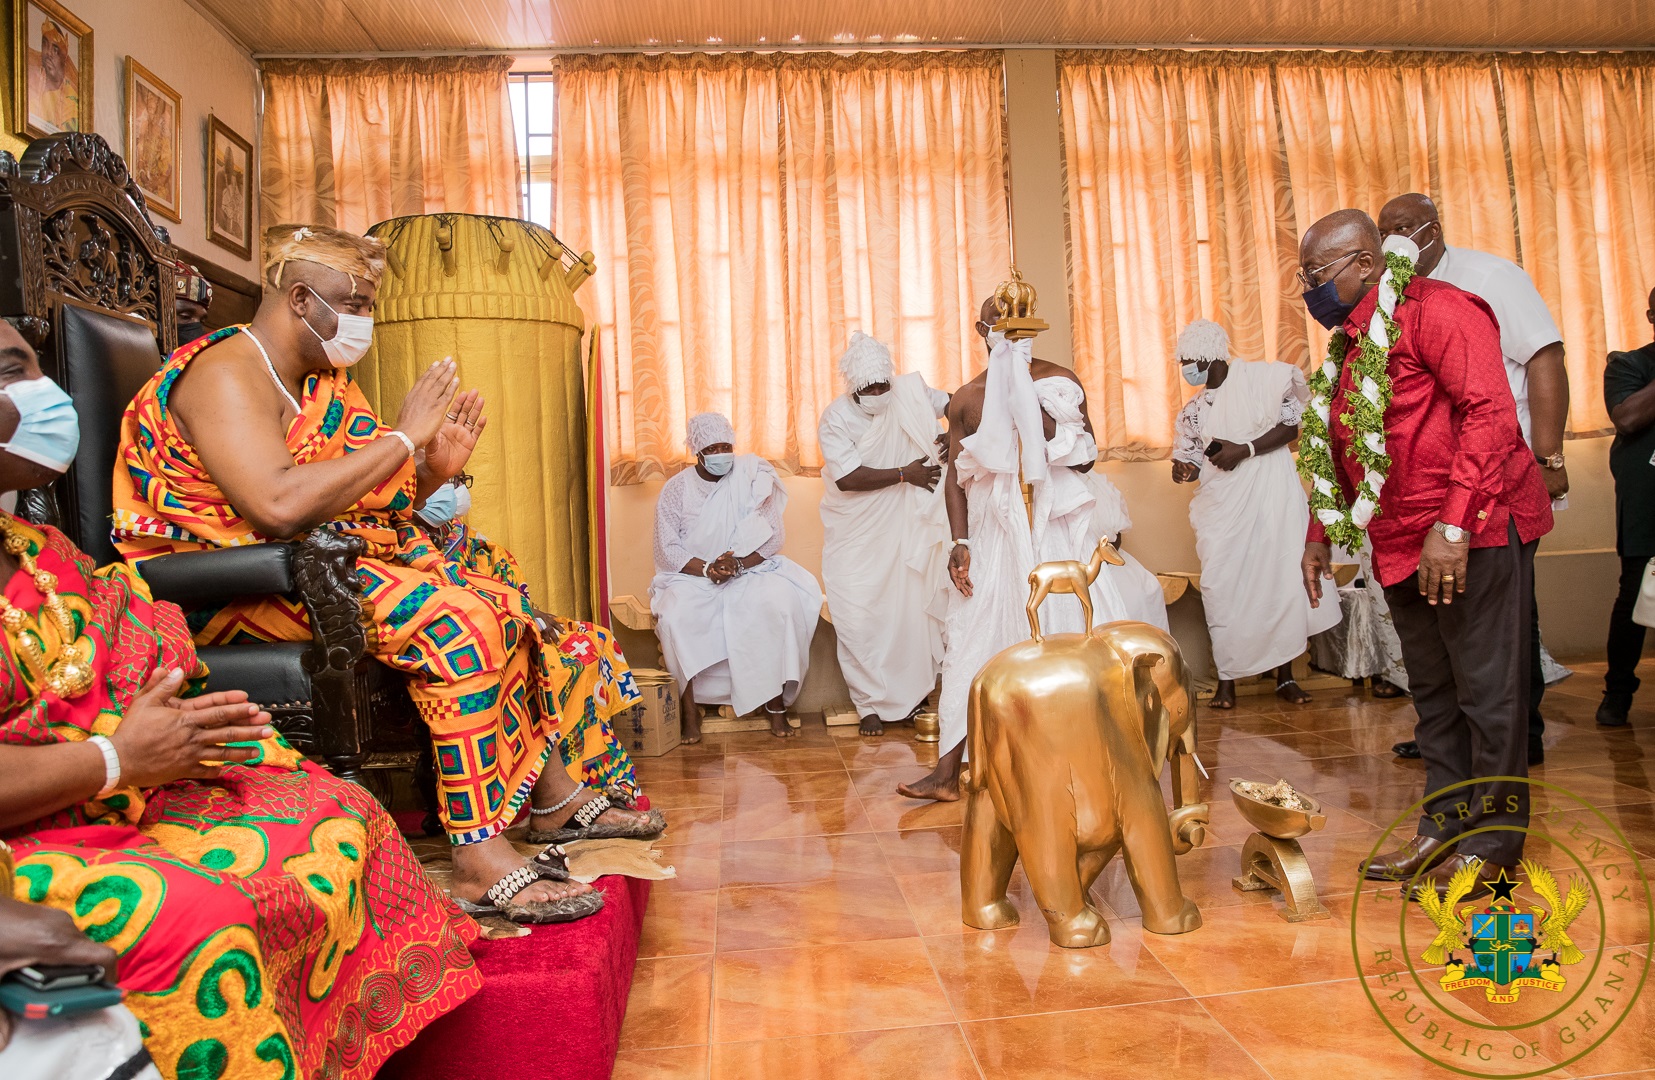 'We are seeing development in Accra' - Ga Mantse to President Akufo-Addo